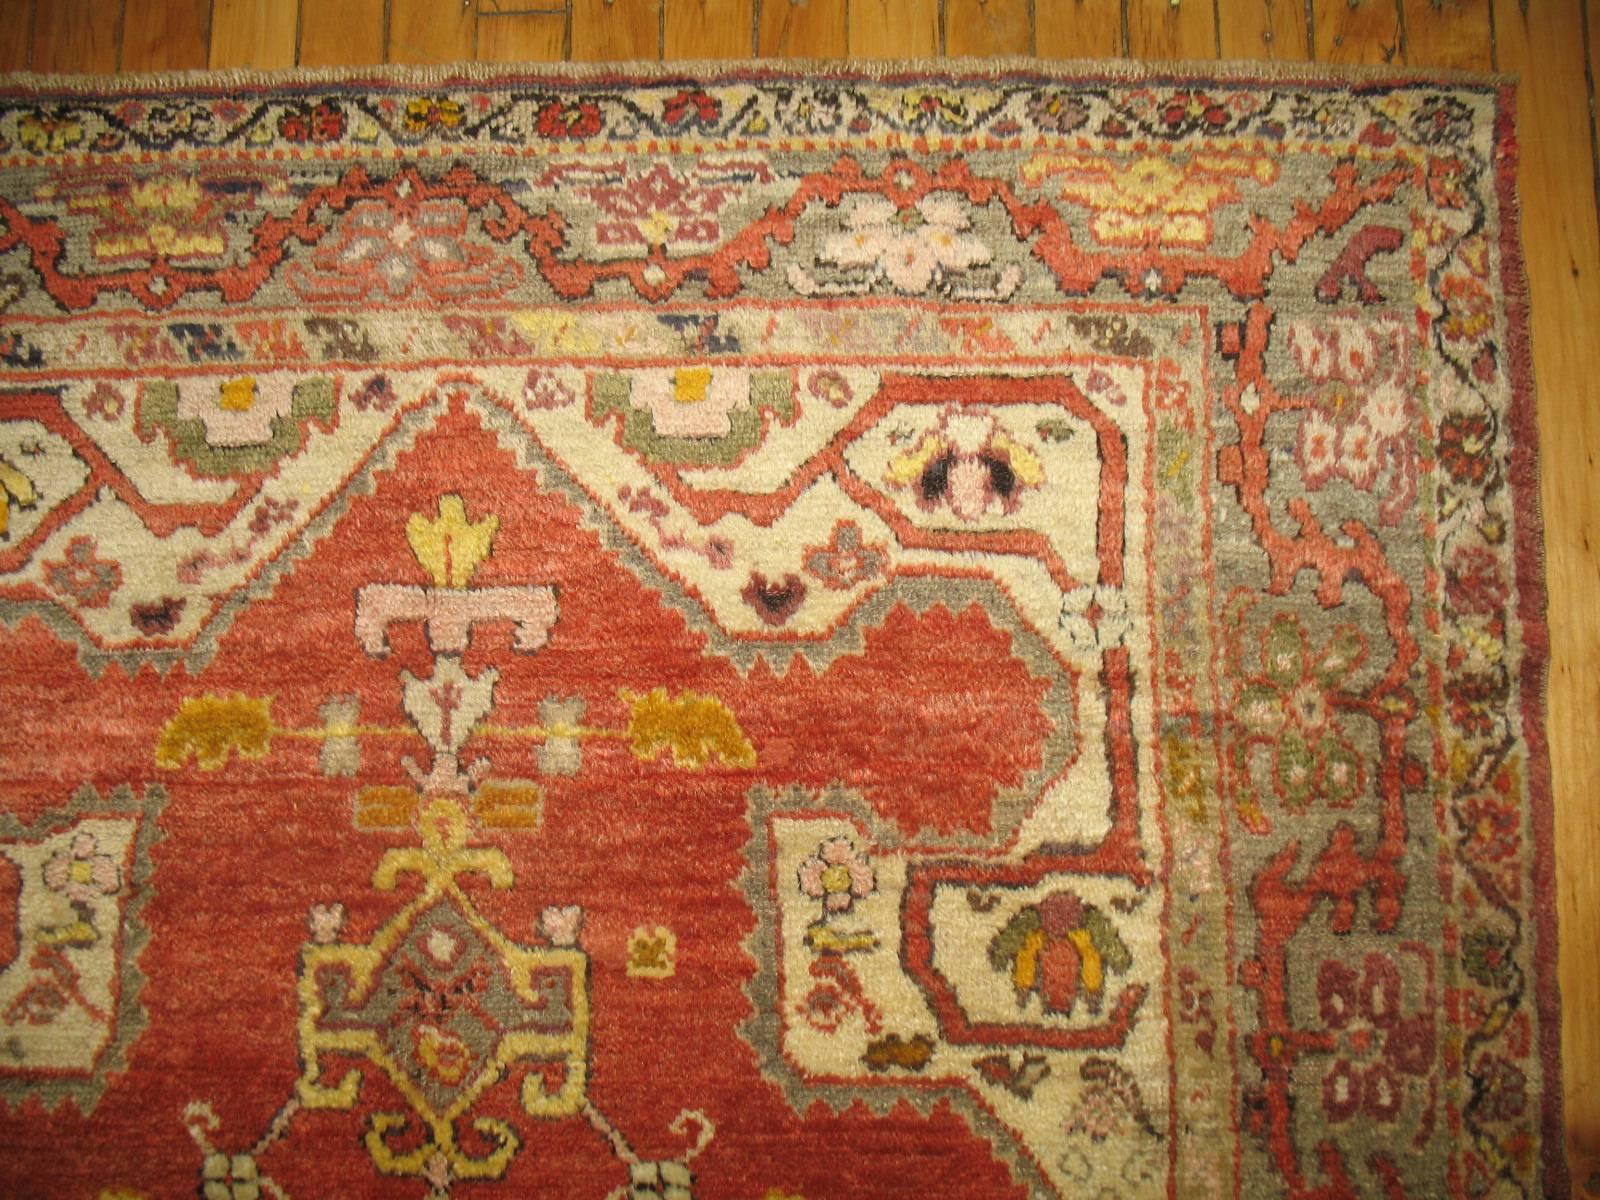 Vintage Turkish Oushak rug featuring silver colored accents.